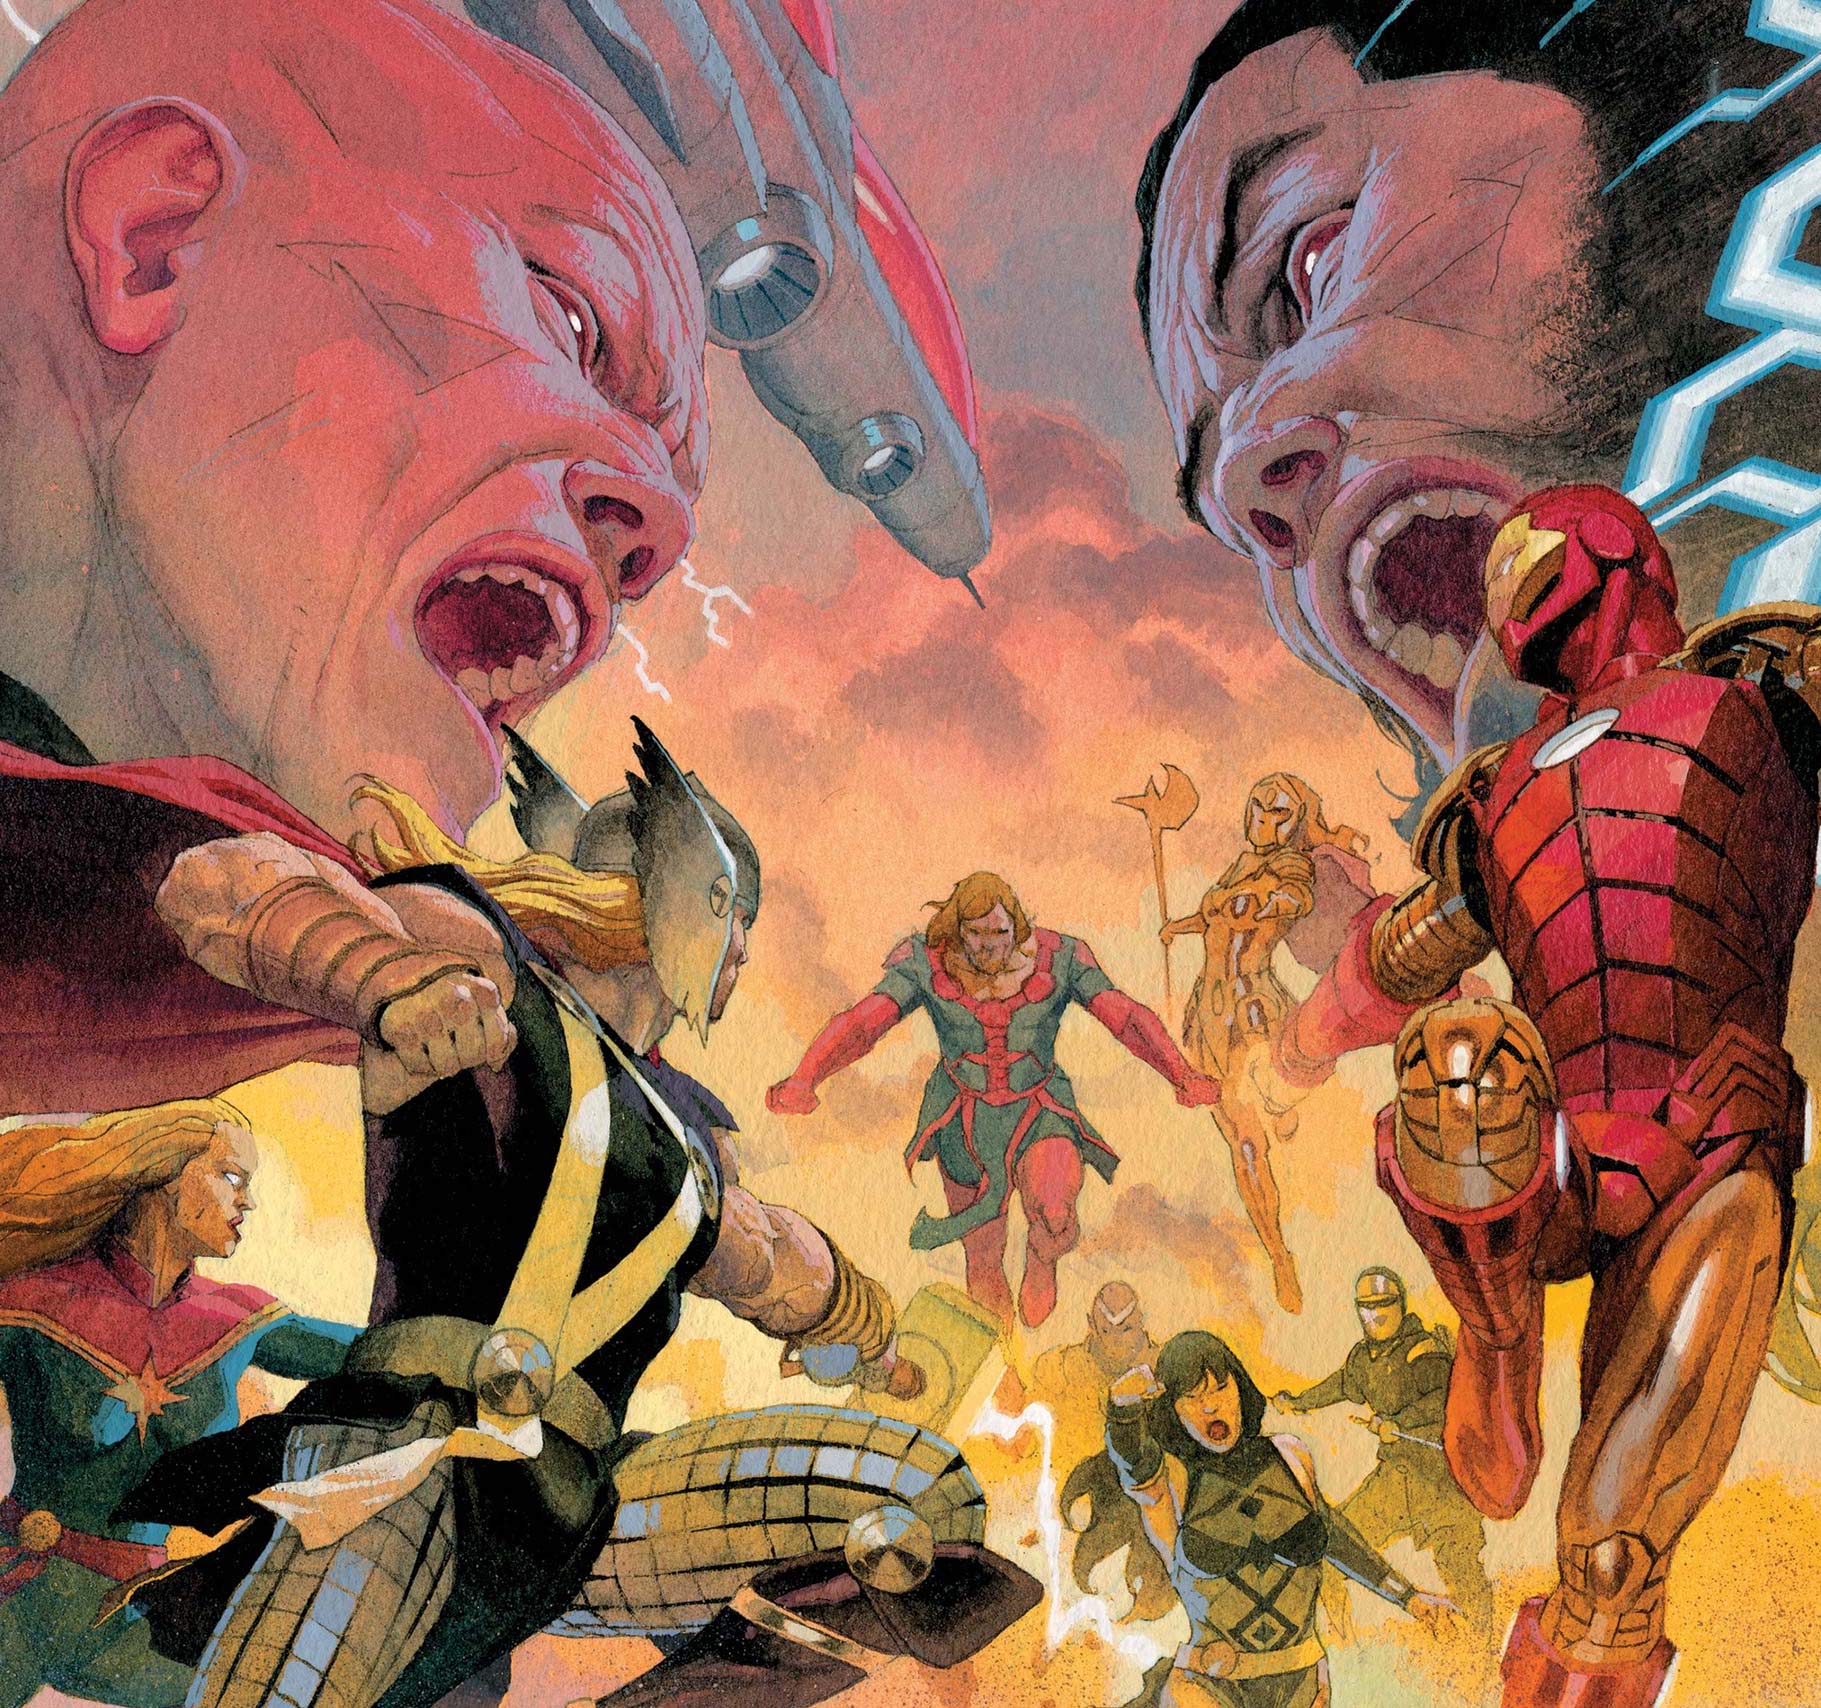 'A.X.E.: Death to the Mutants' #1 gives the good-guy Eternals something to do